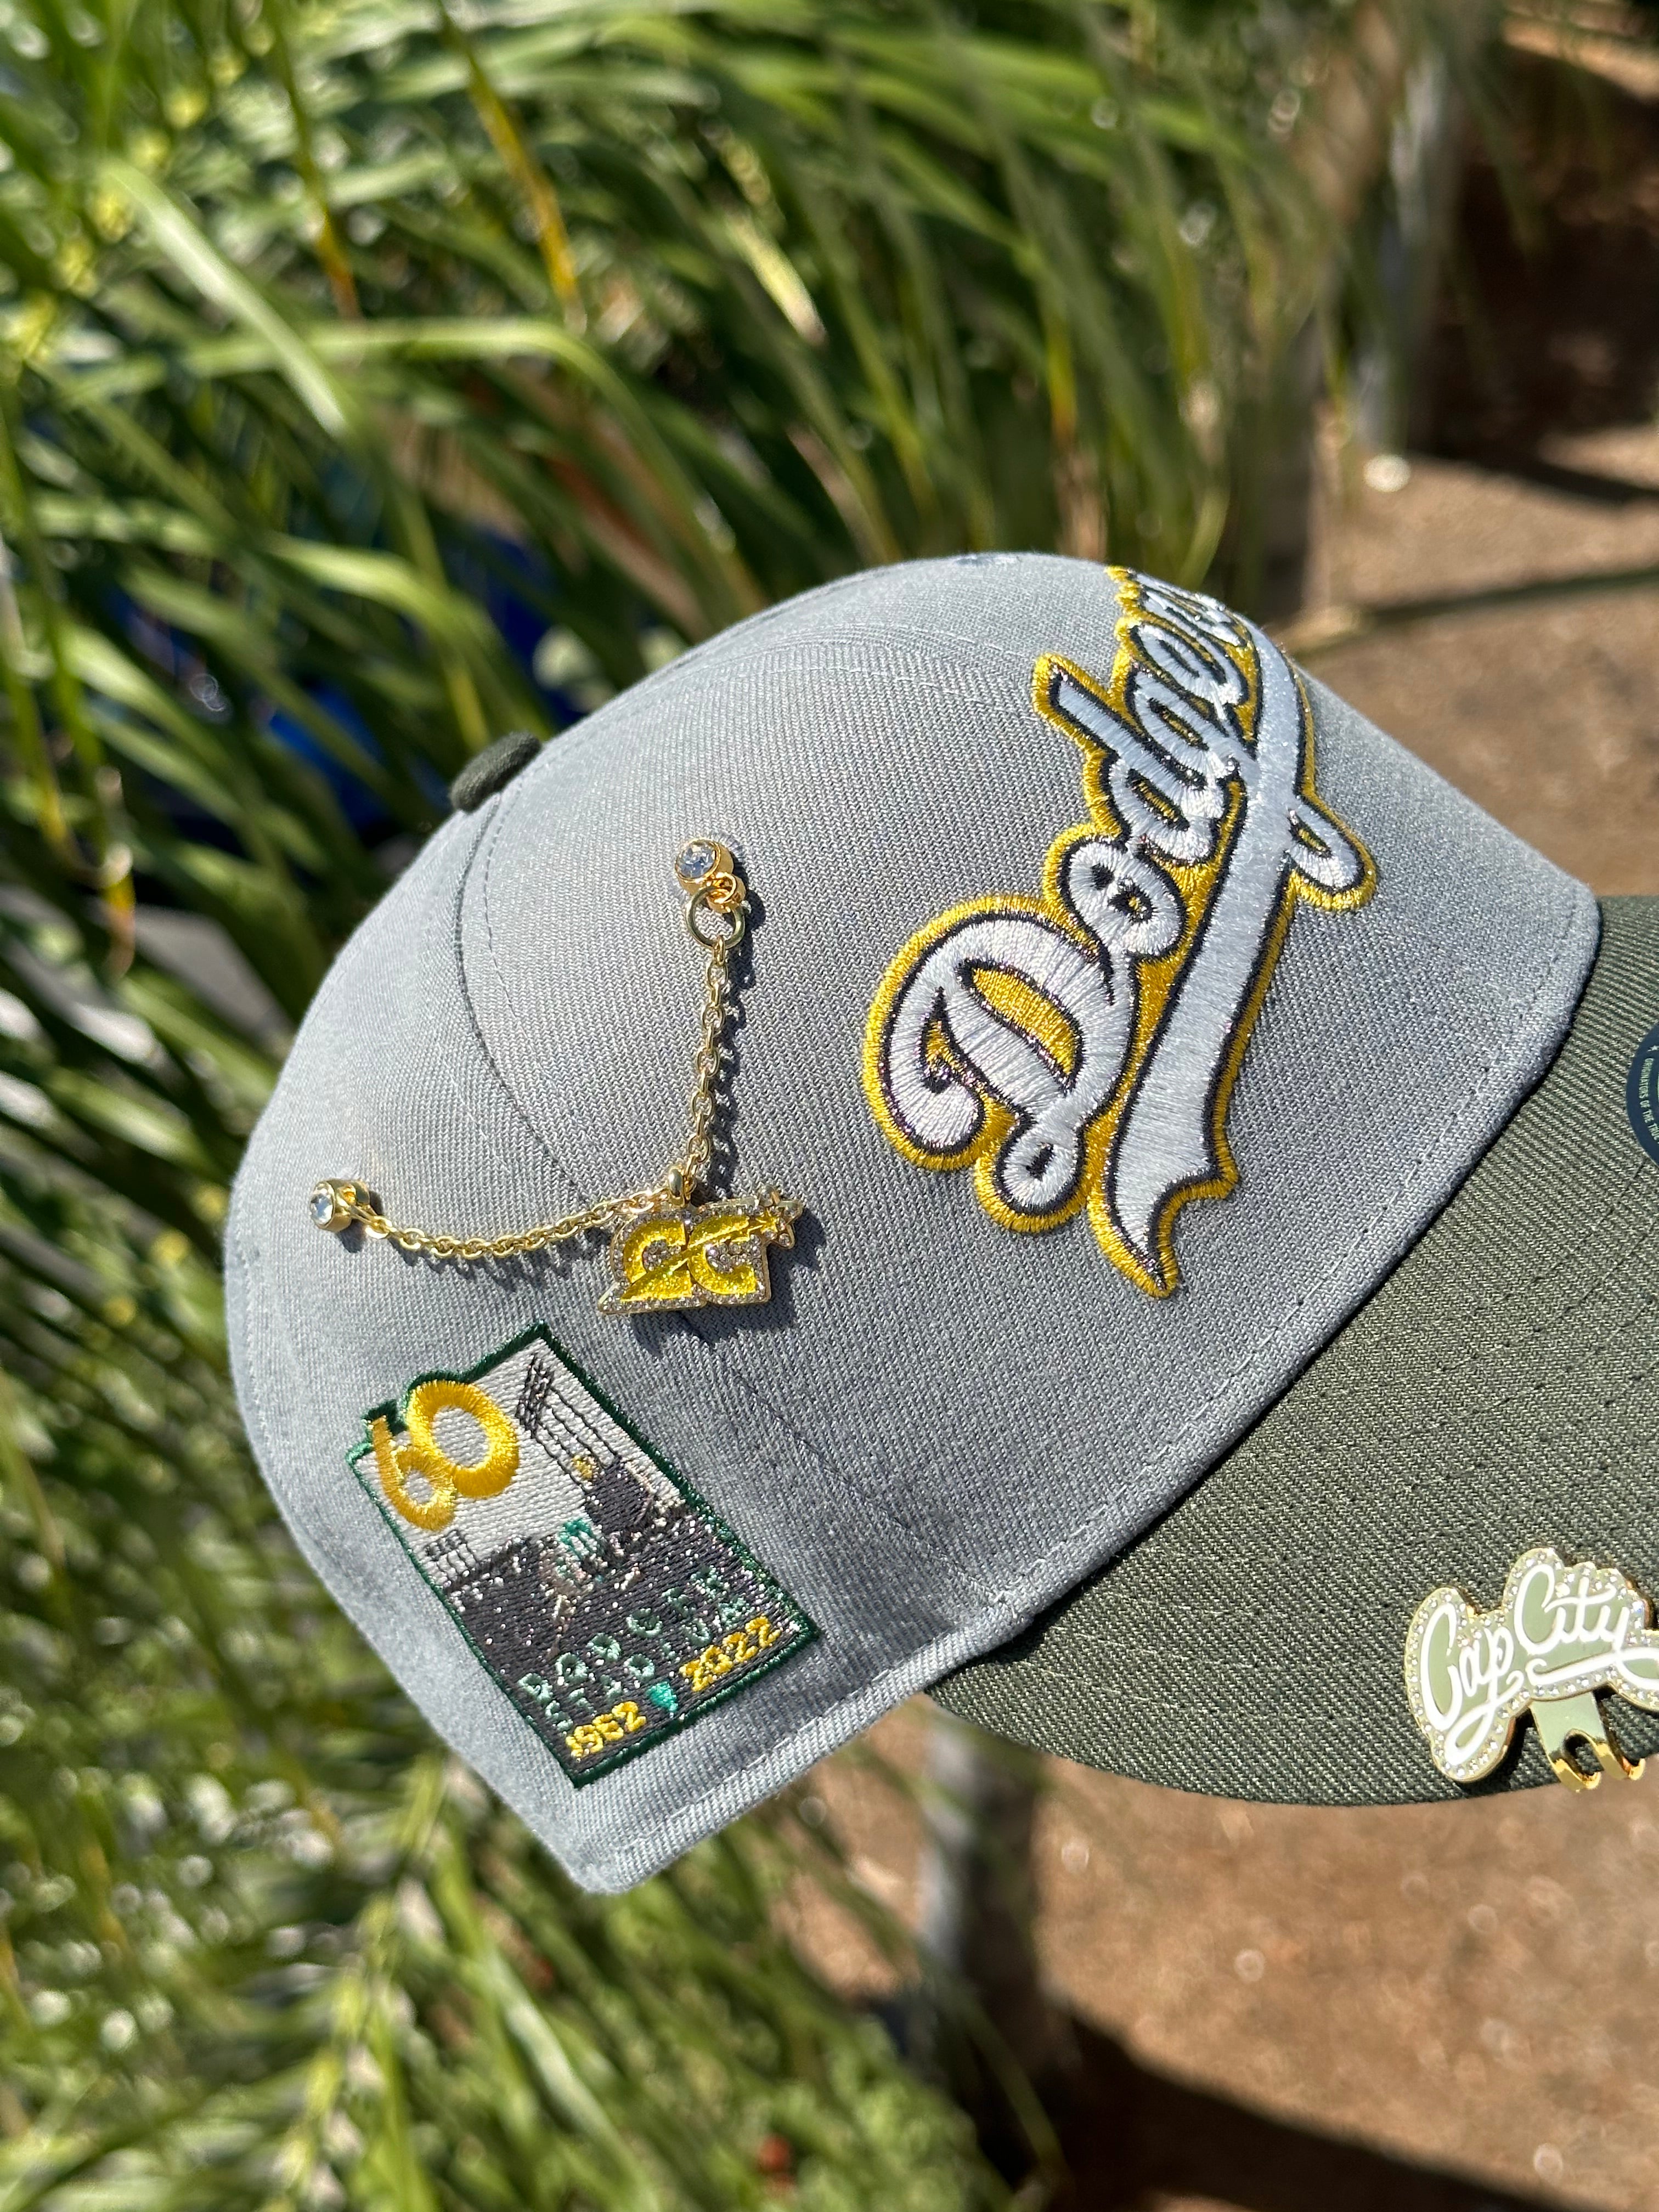 NEW ERA EXCLUSIVE 59FIFTY SMOKE GREY/GREEN LOS ANGELES DODGERS SCRIPT W/ 60TH ANNIVERSARY  DODGER STADIUM PATCH